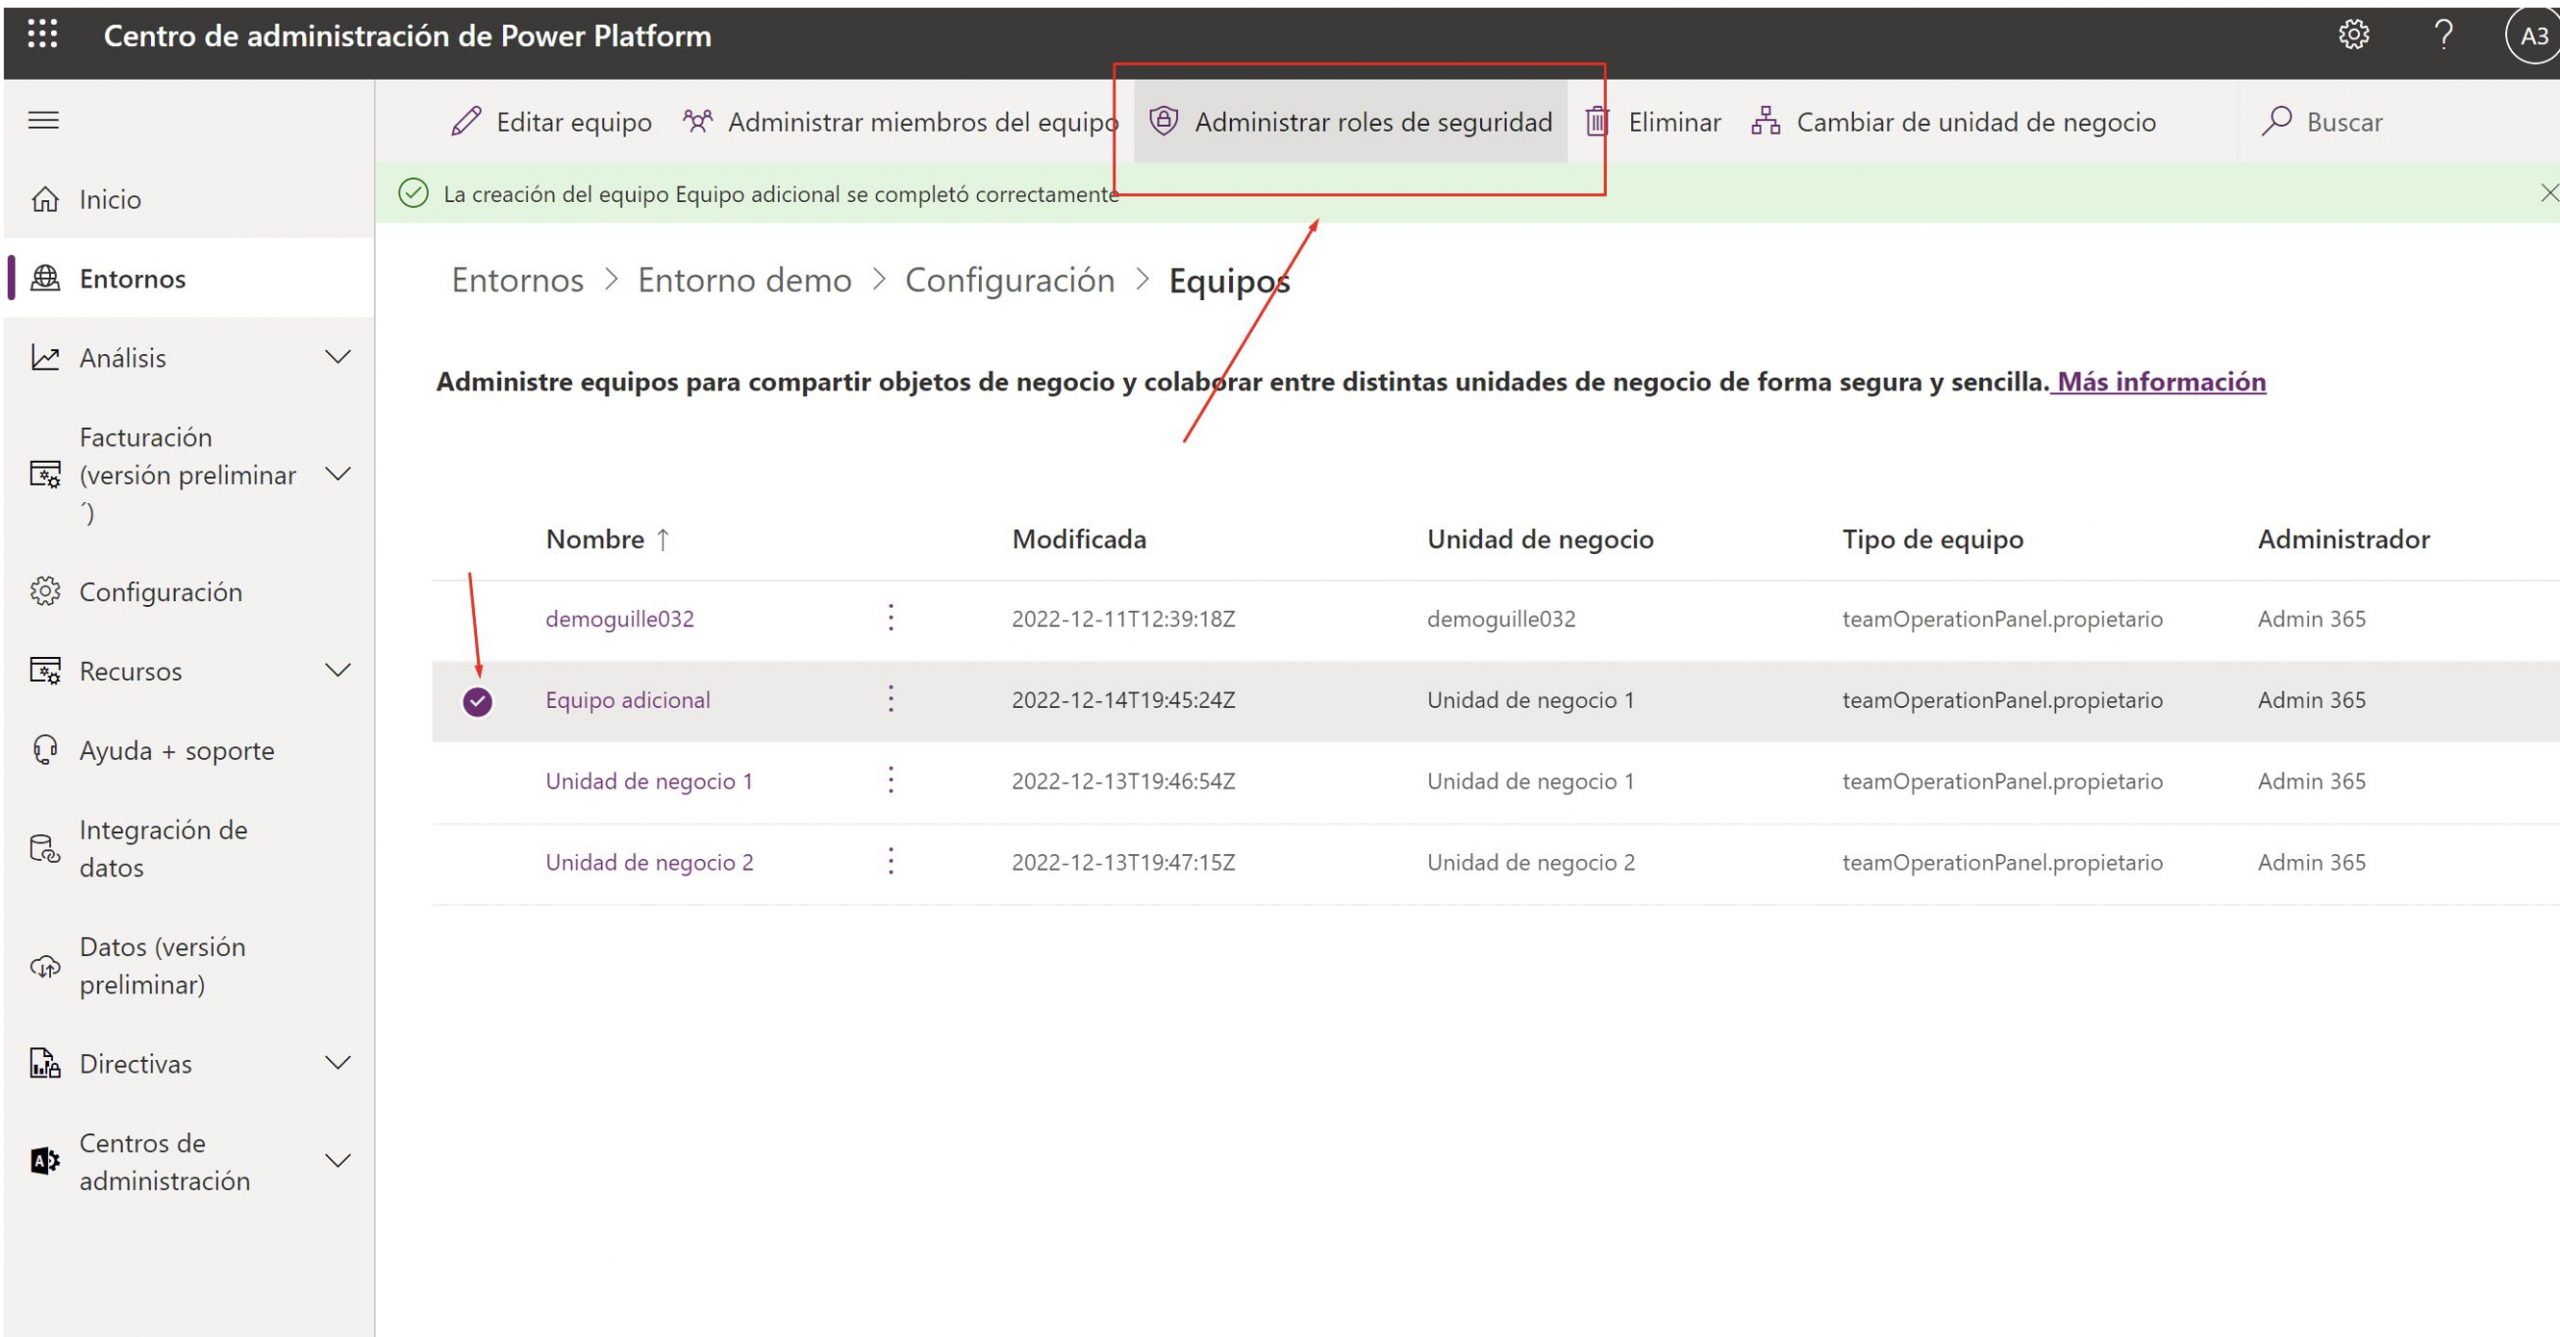 Assigning mass security roles to users in D365 CE Axazure